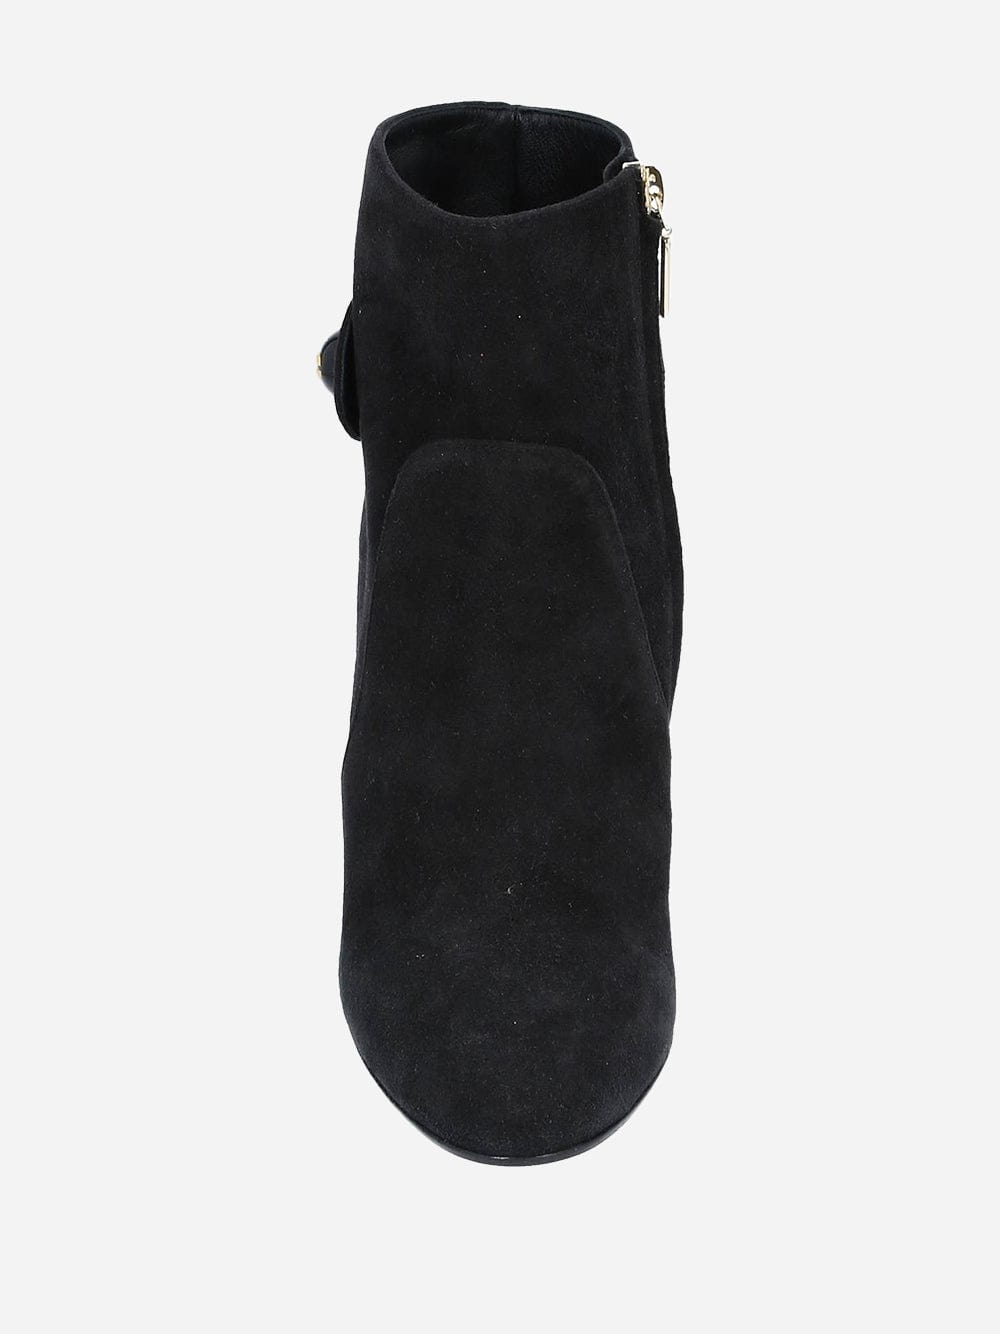 Dolce & Gabbana Logo Suede Ankle Boots